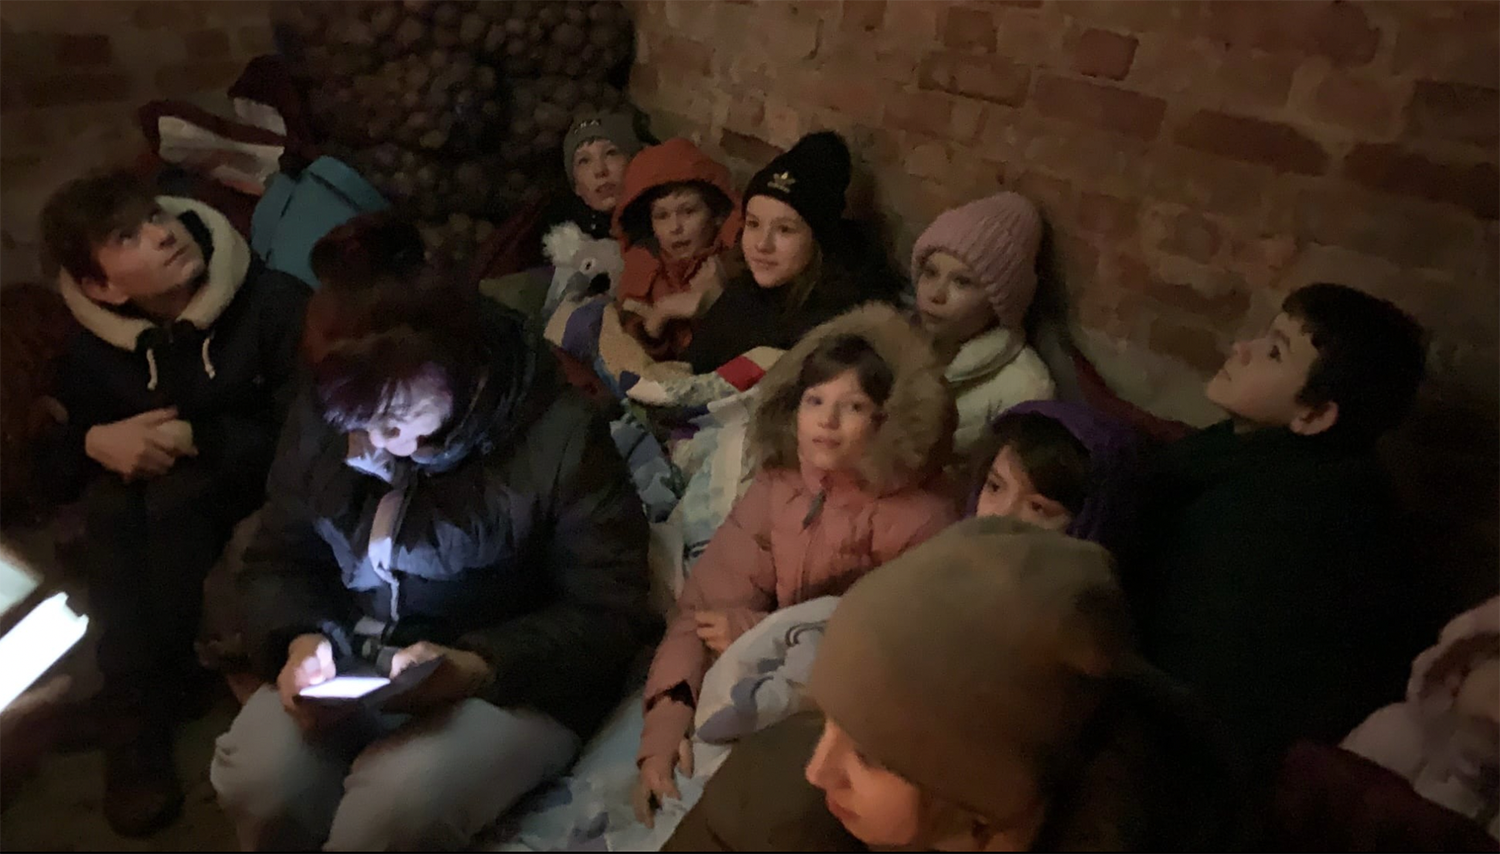 This photo sent to the Kellys by Jeremiah’s Hope administrator Xander Petrov shows the children sheltering in the unheated root cellar of a farmhouse in Ukraine.